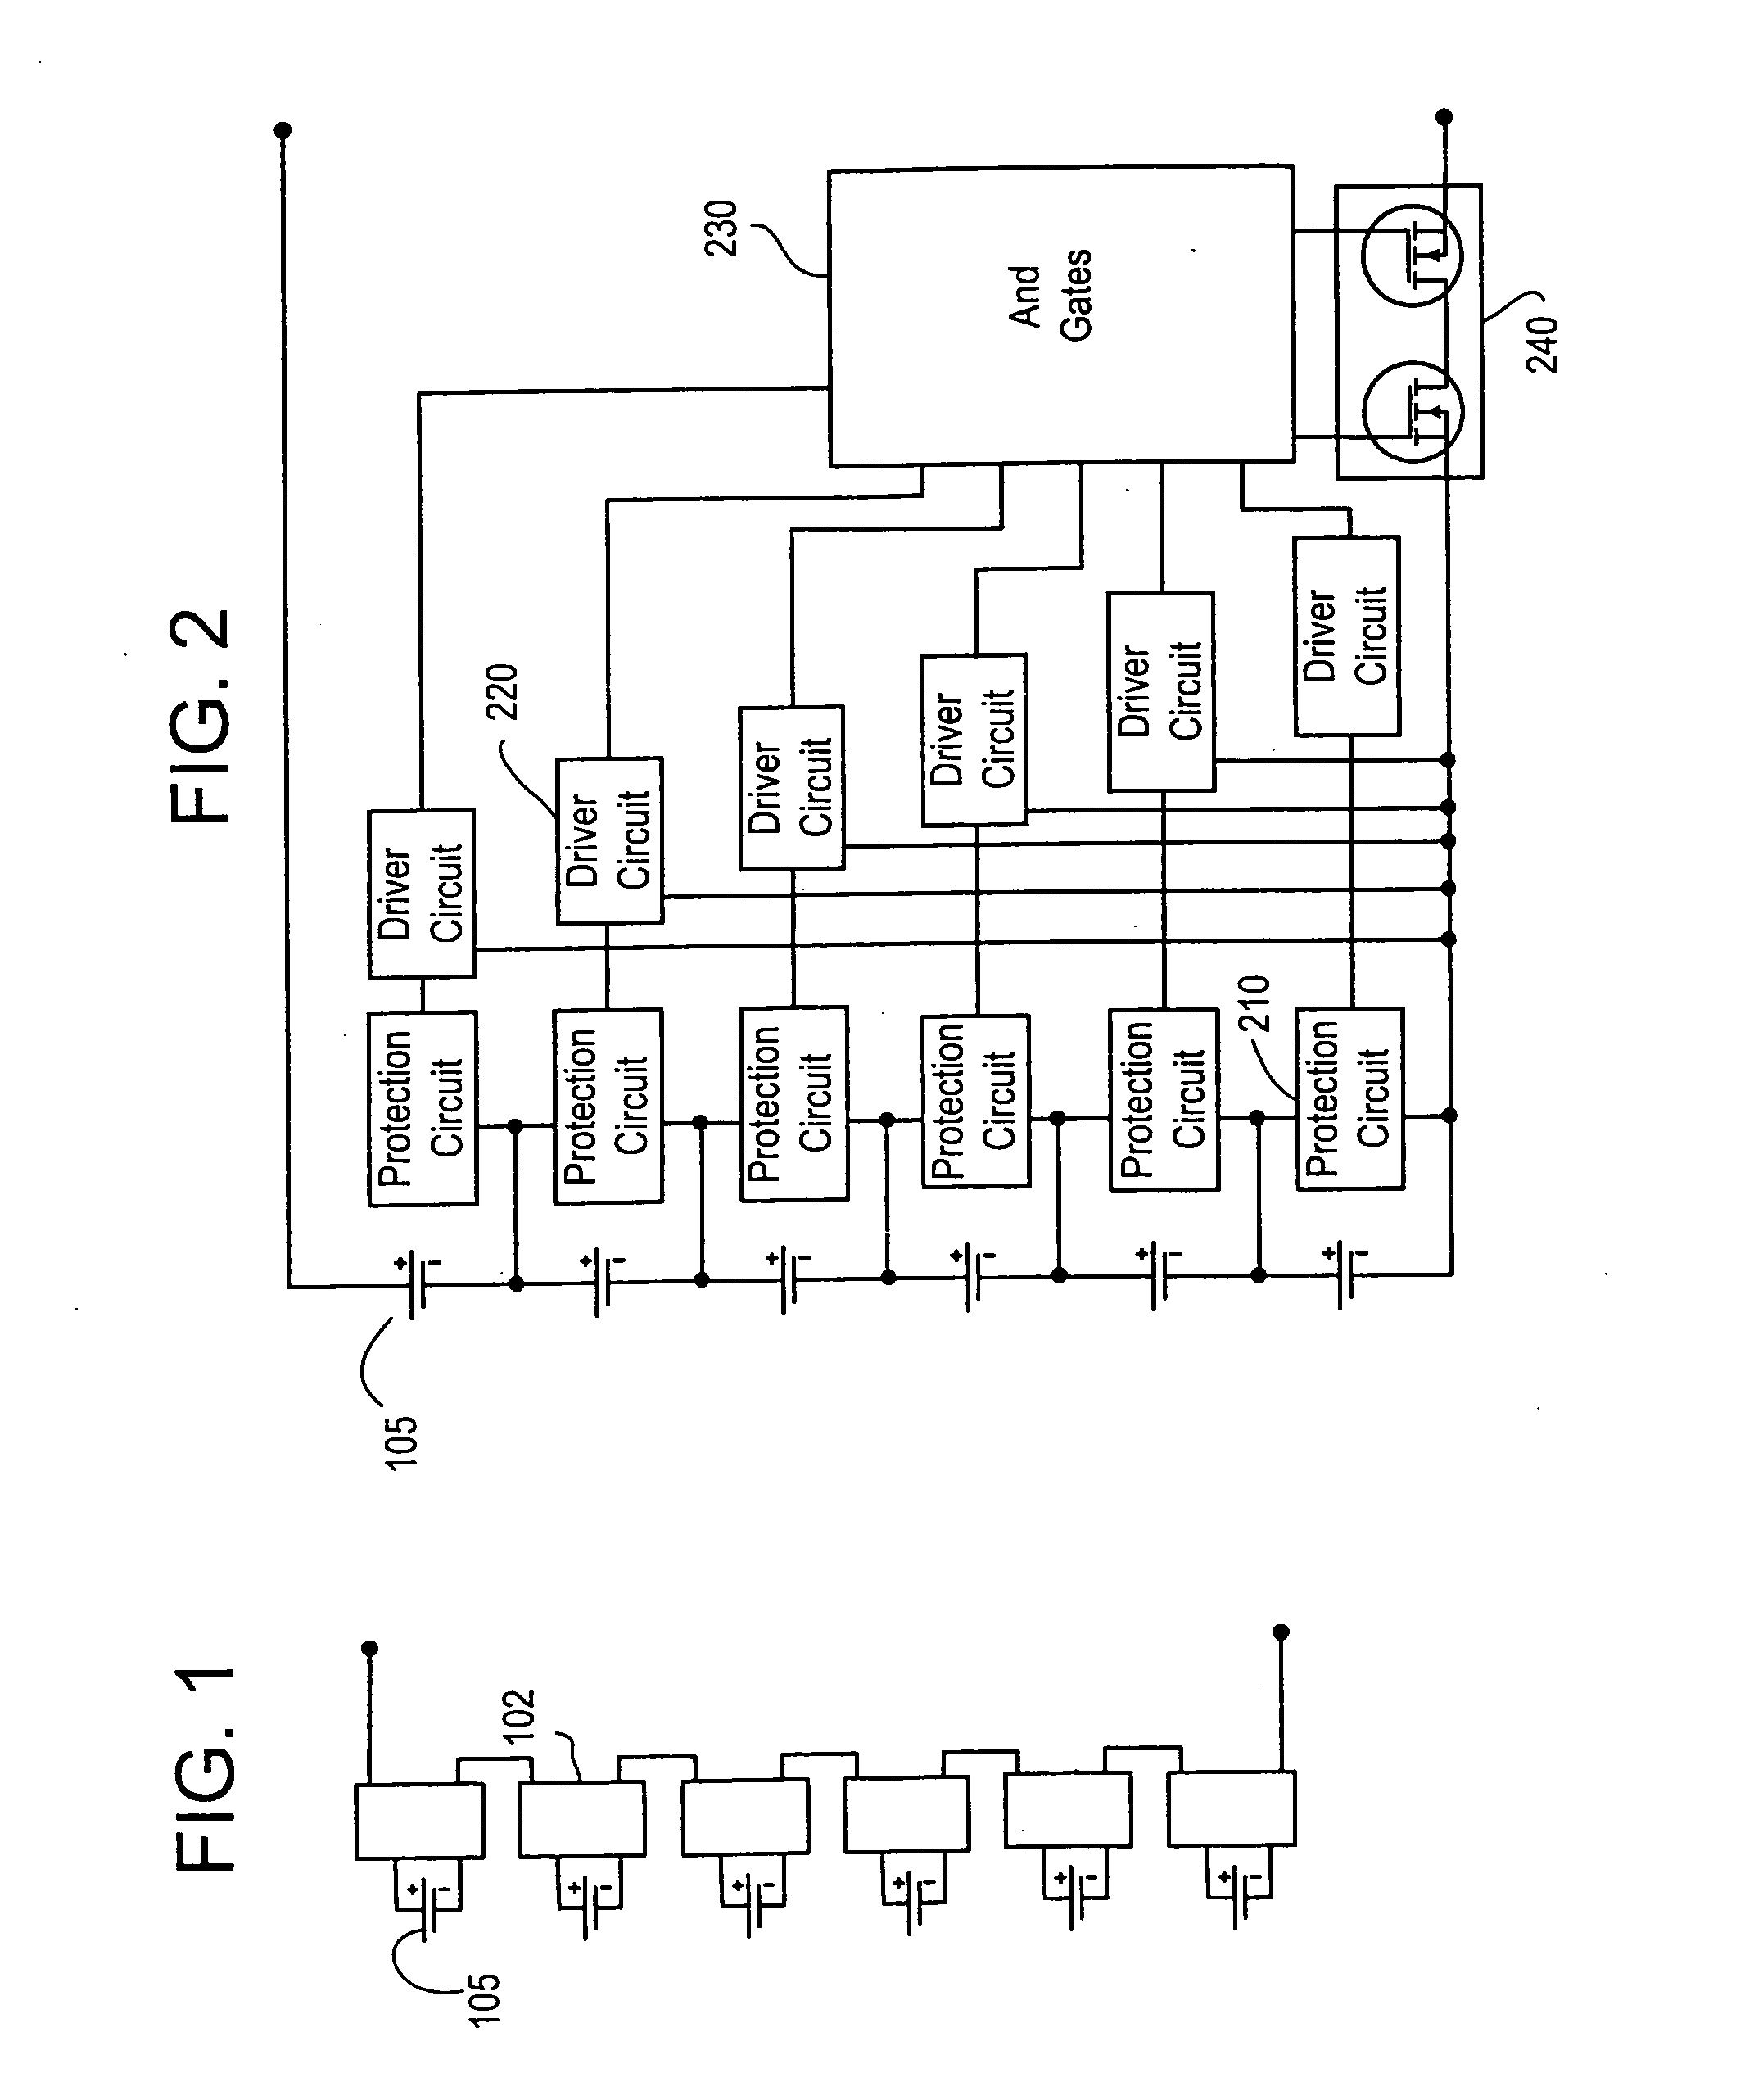 Protection methods, protection circuits and protection devices for secondary batteries, a power tool, charger and battery pack adapted to provide protection against fault conditions in the battery pack